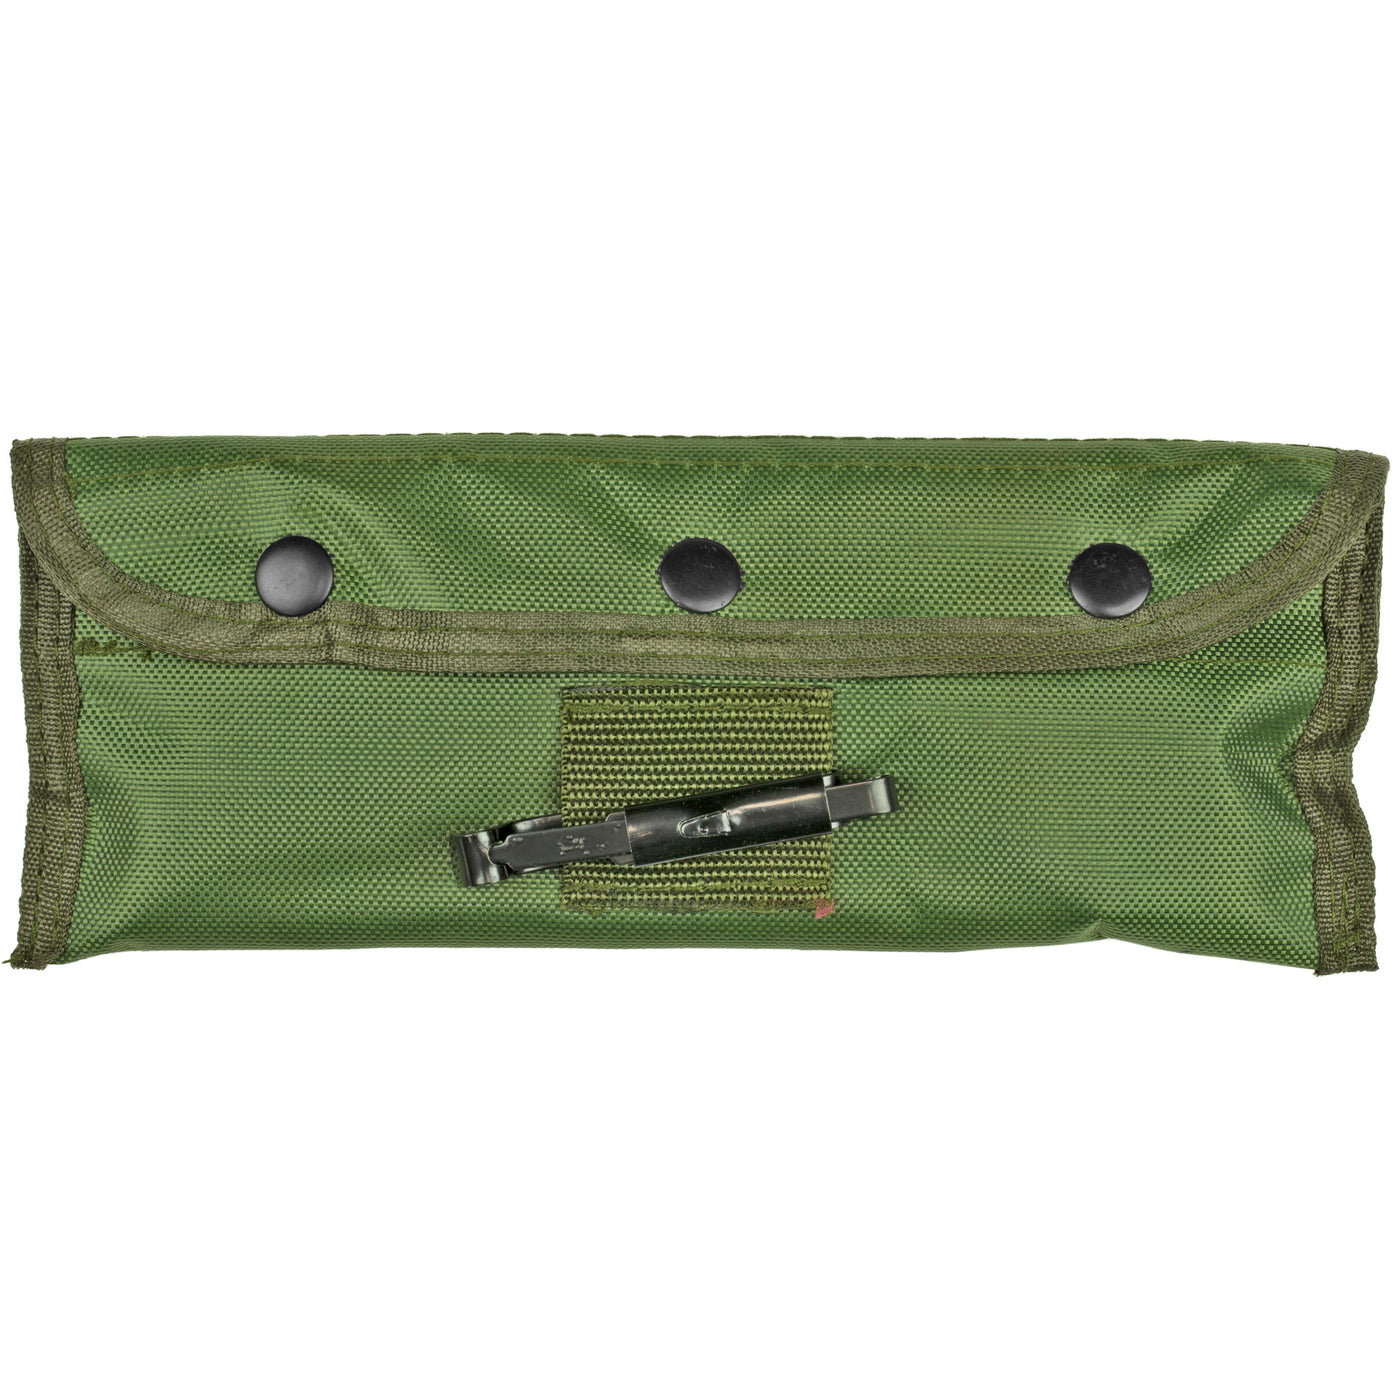 Utg Ar15 Cleaning Kit W Pouch